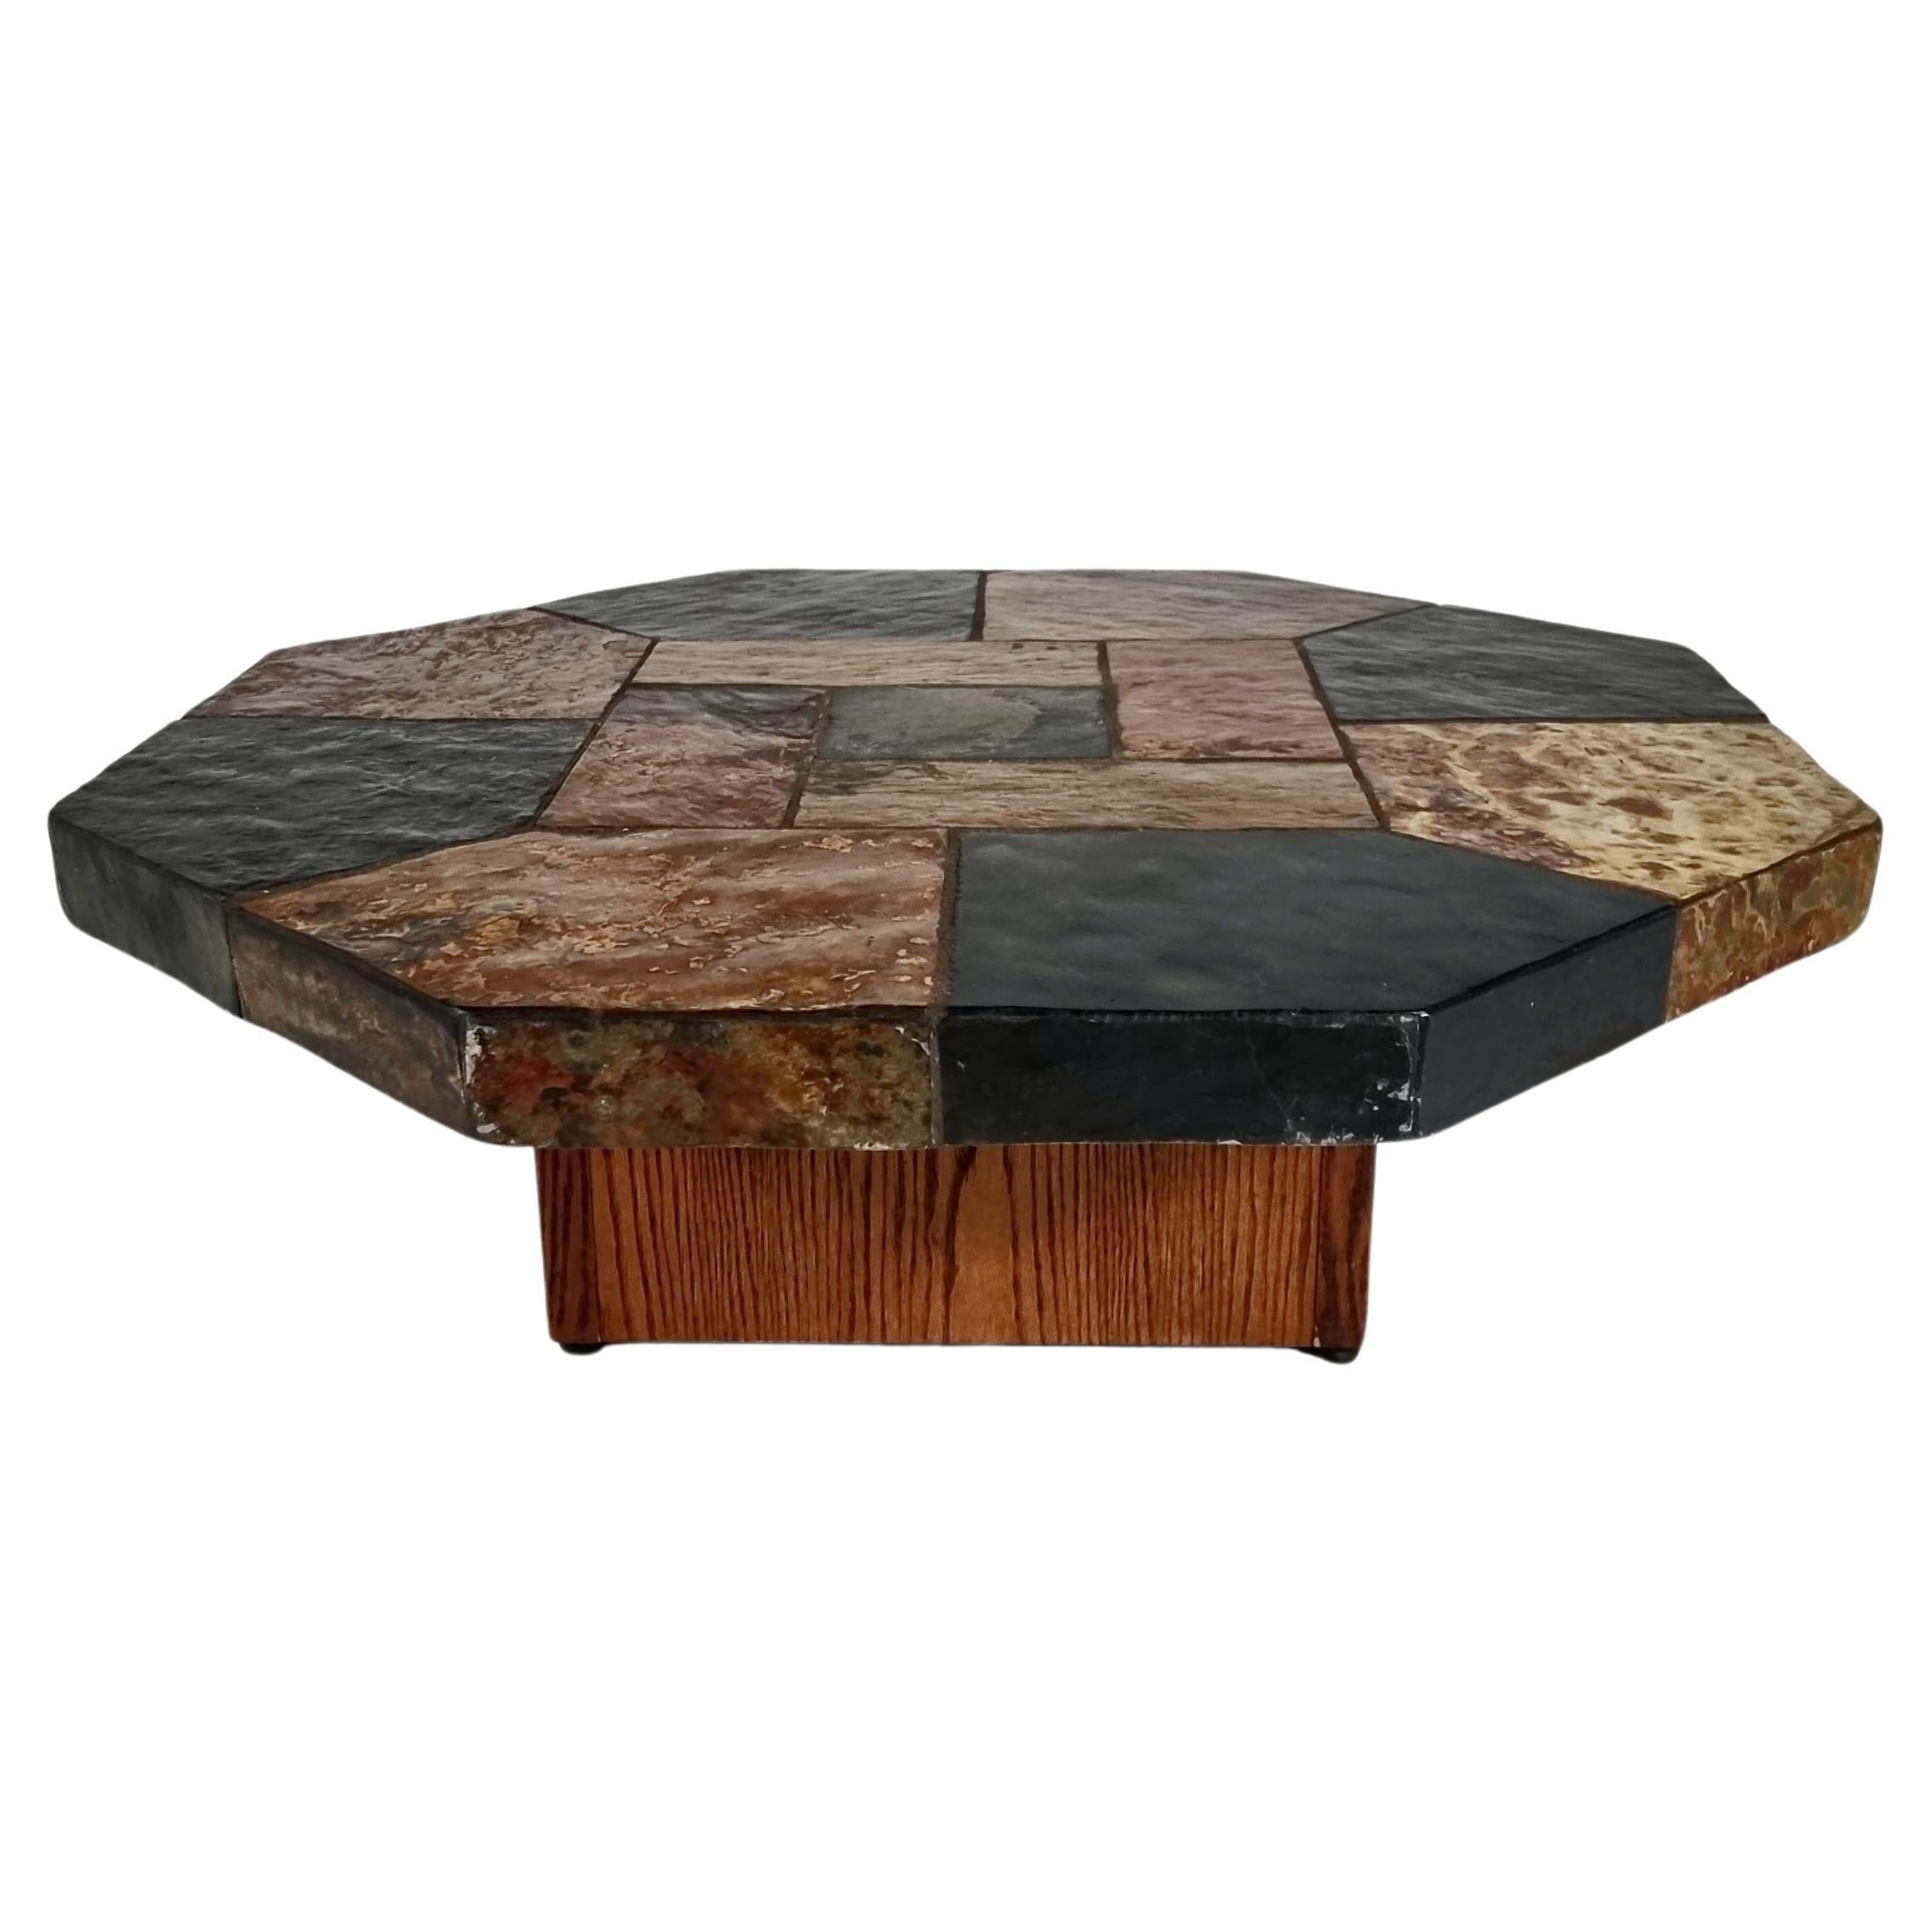 Brutalist slate stone and wood hexagonal coffee table, Belgium, 1970s For Sale